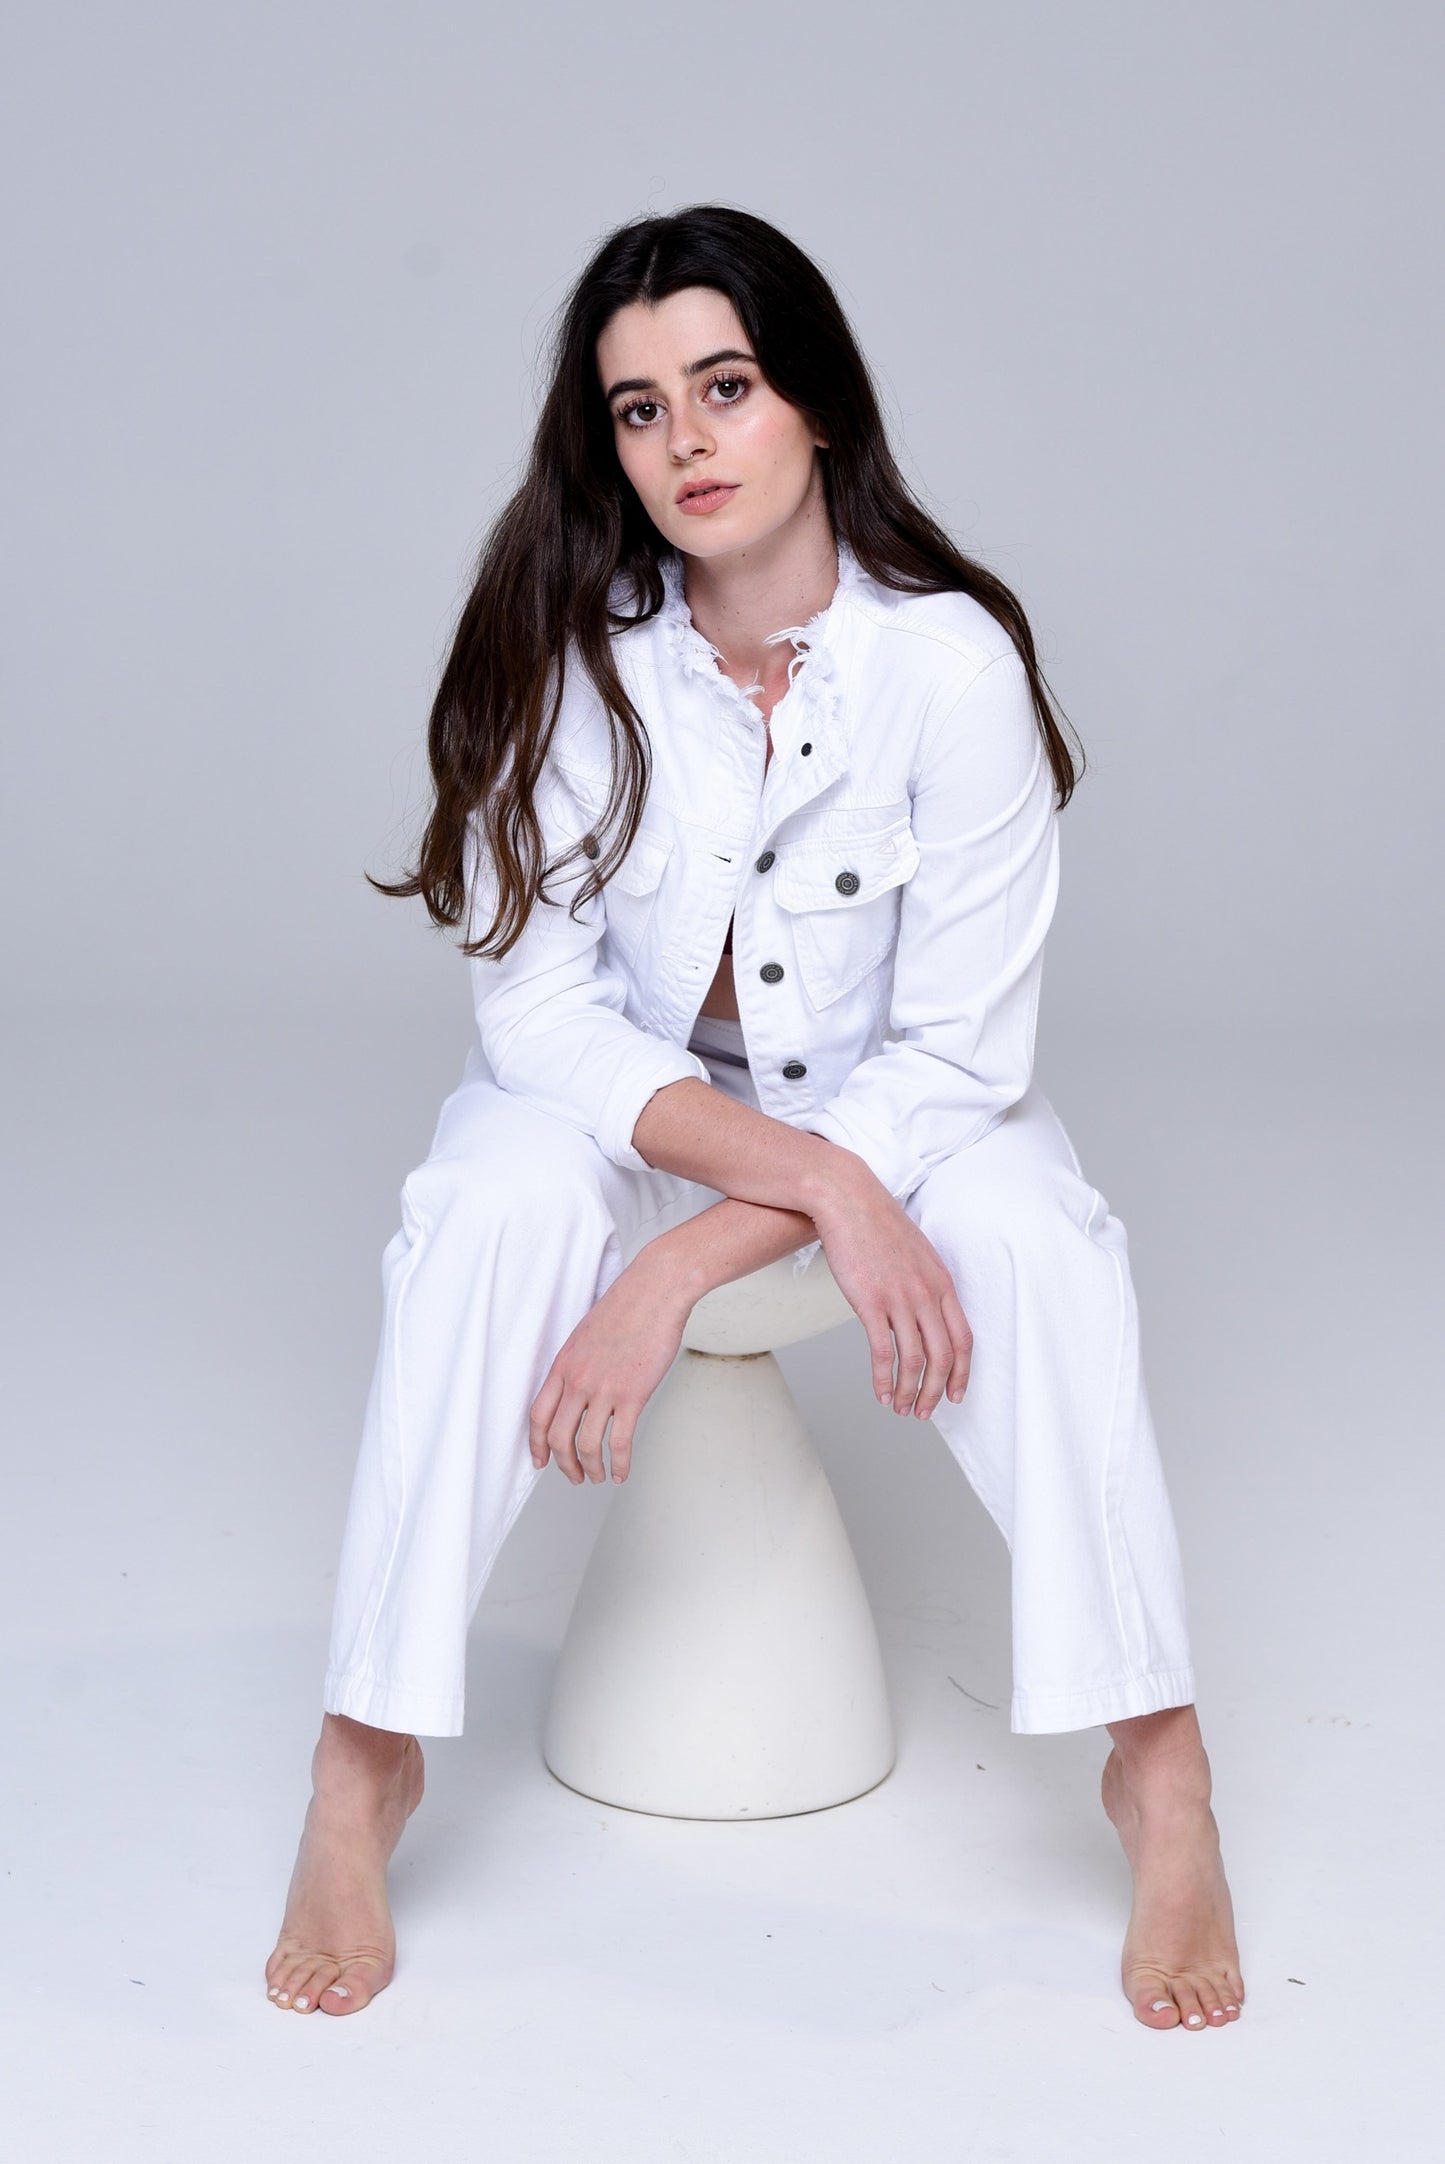 Brunette sitting on a stool wearing a white denim collarless jacket, burgundy bra and white jeans.